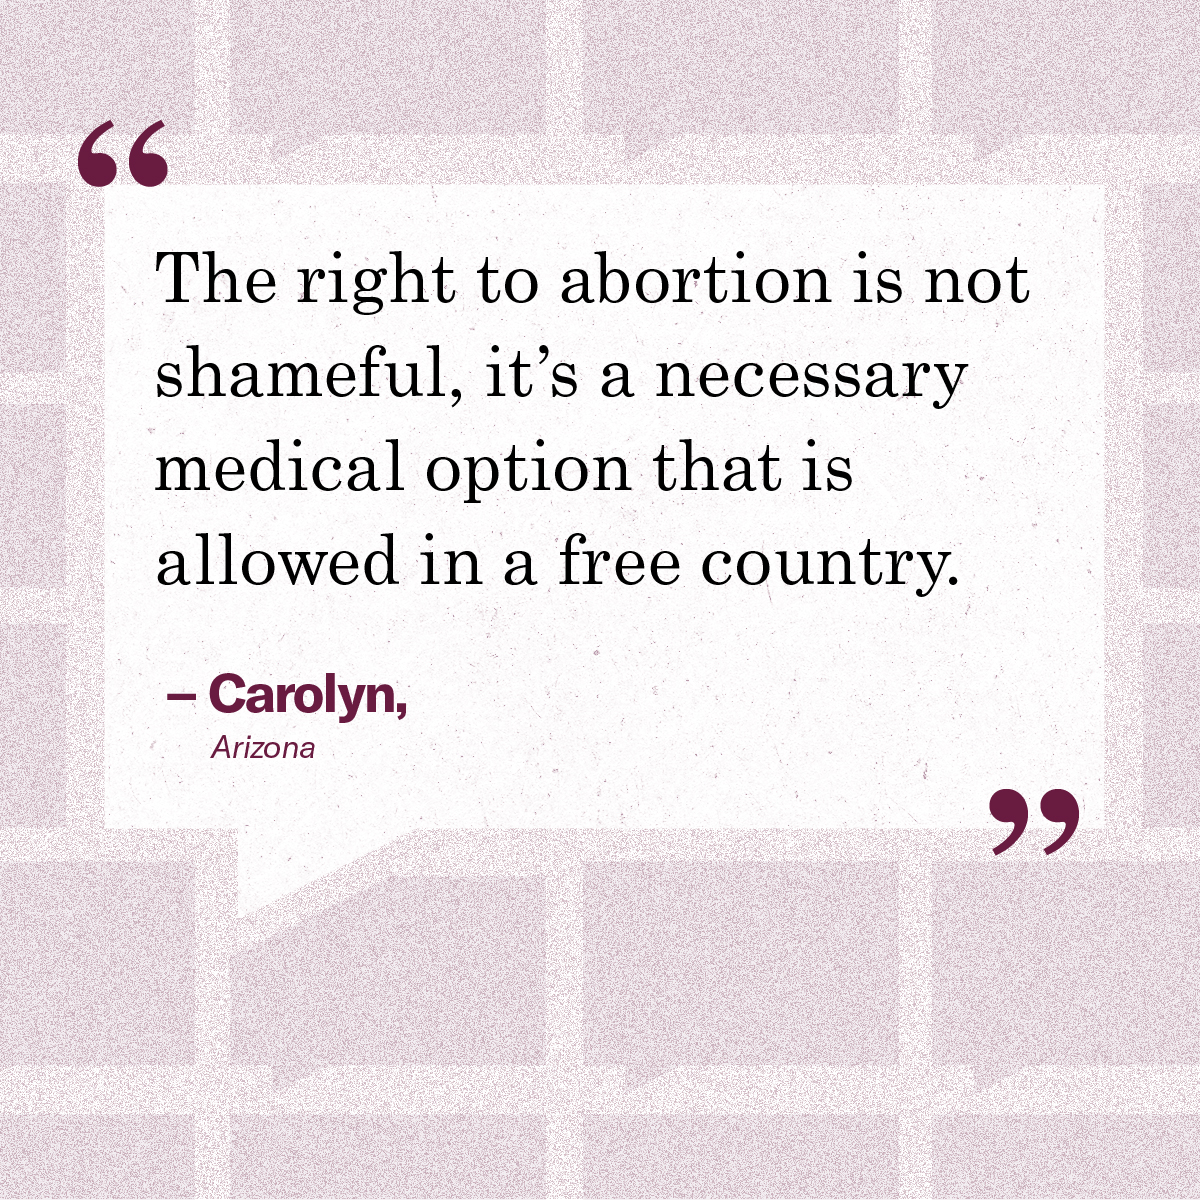 “The right to abortion is not shameful, it’s a necessary medical option that is allowed in a free country.” – Carolyn, Arizona